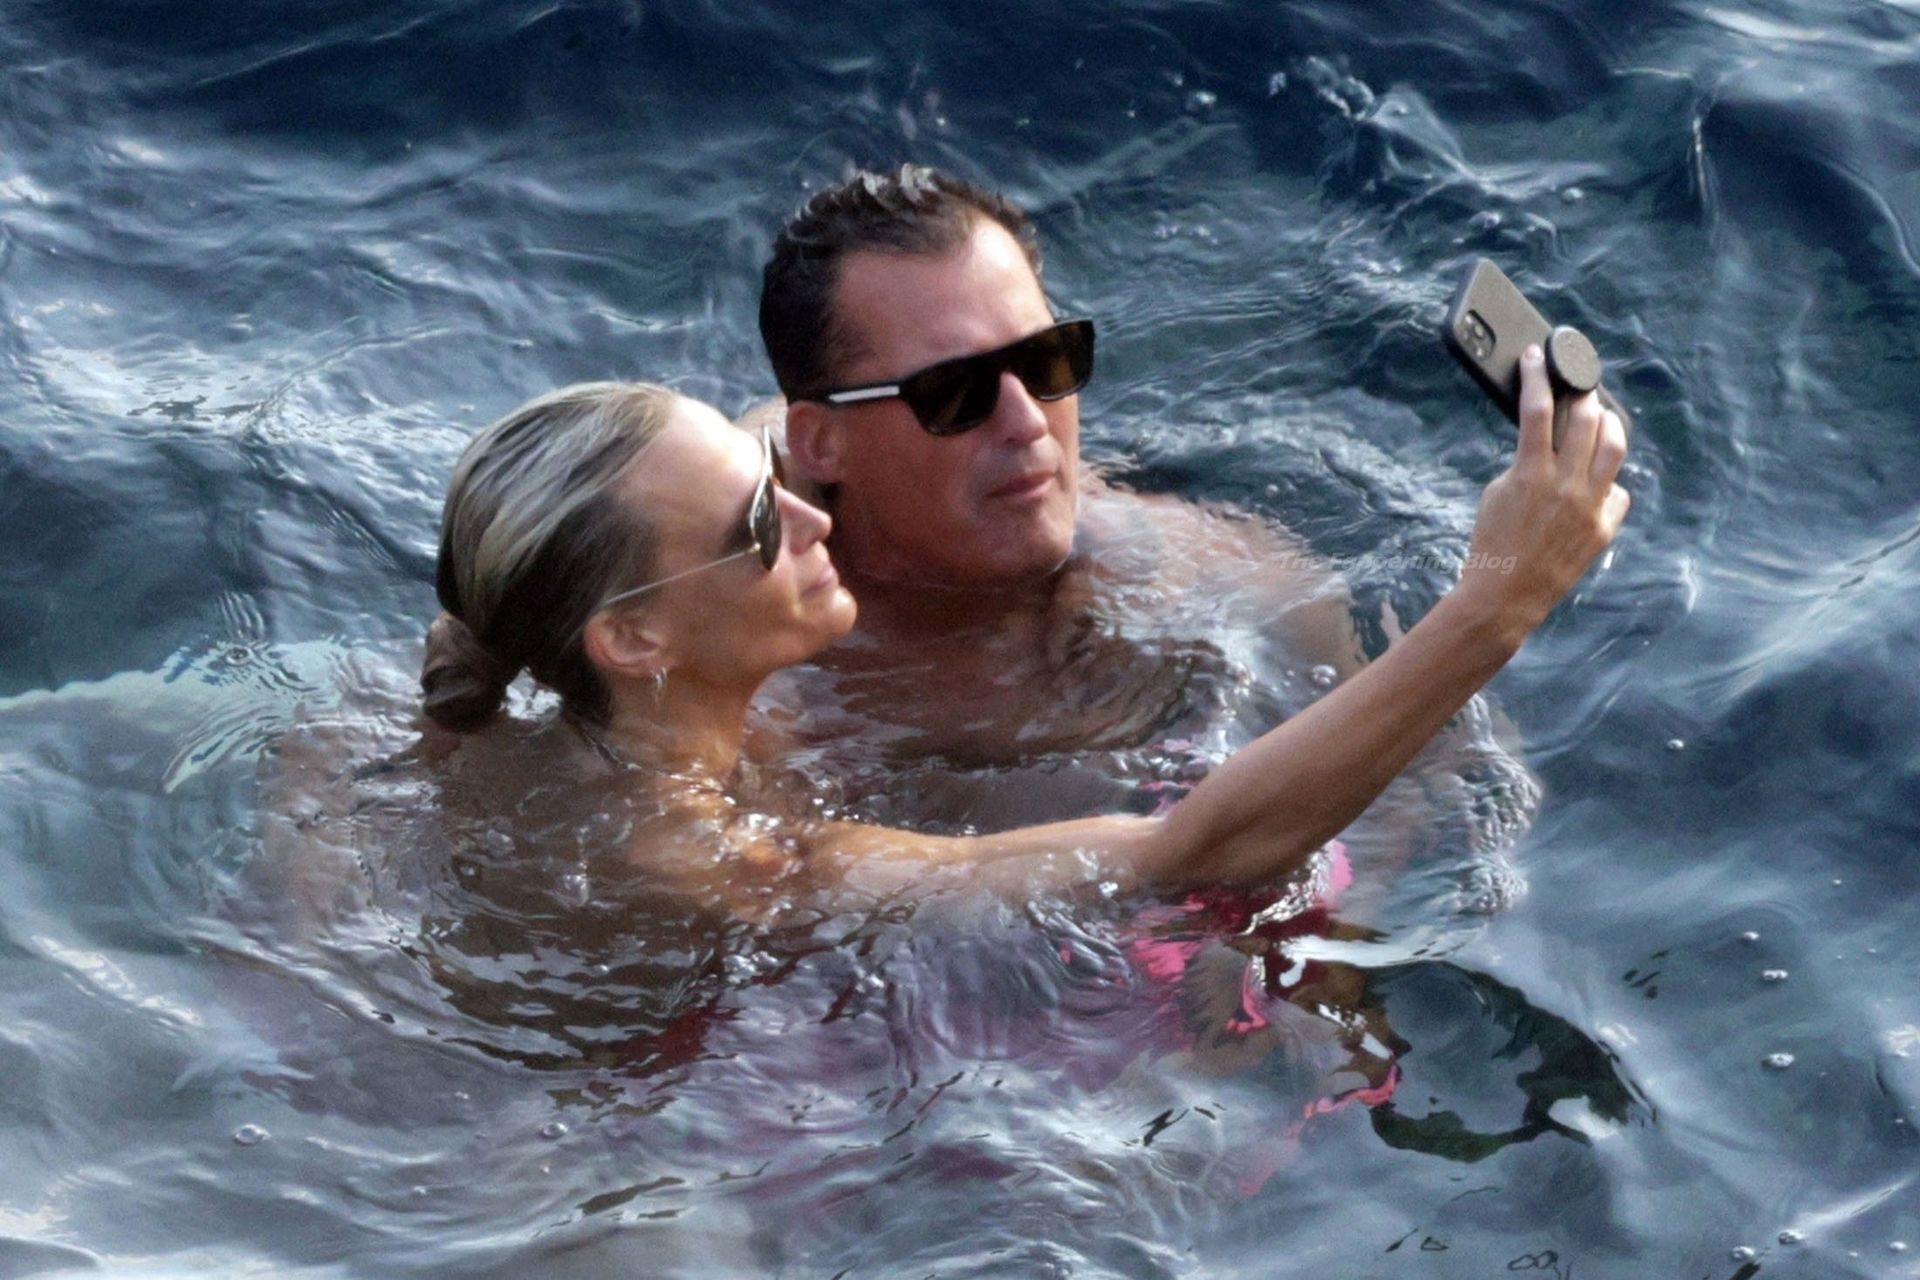 Molly Sims & Scott Stuber Enjoy a Relaxing Sea Holiday in Capri (62 Photos) [Updated]